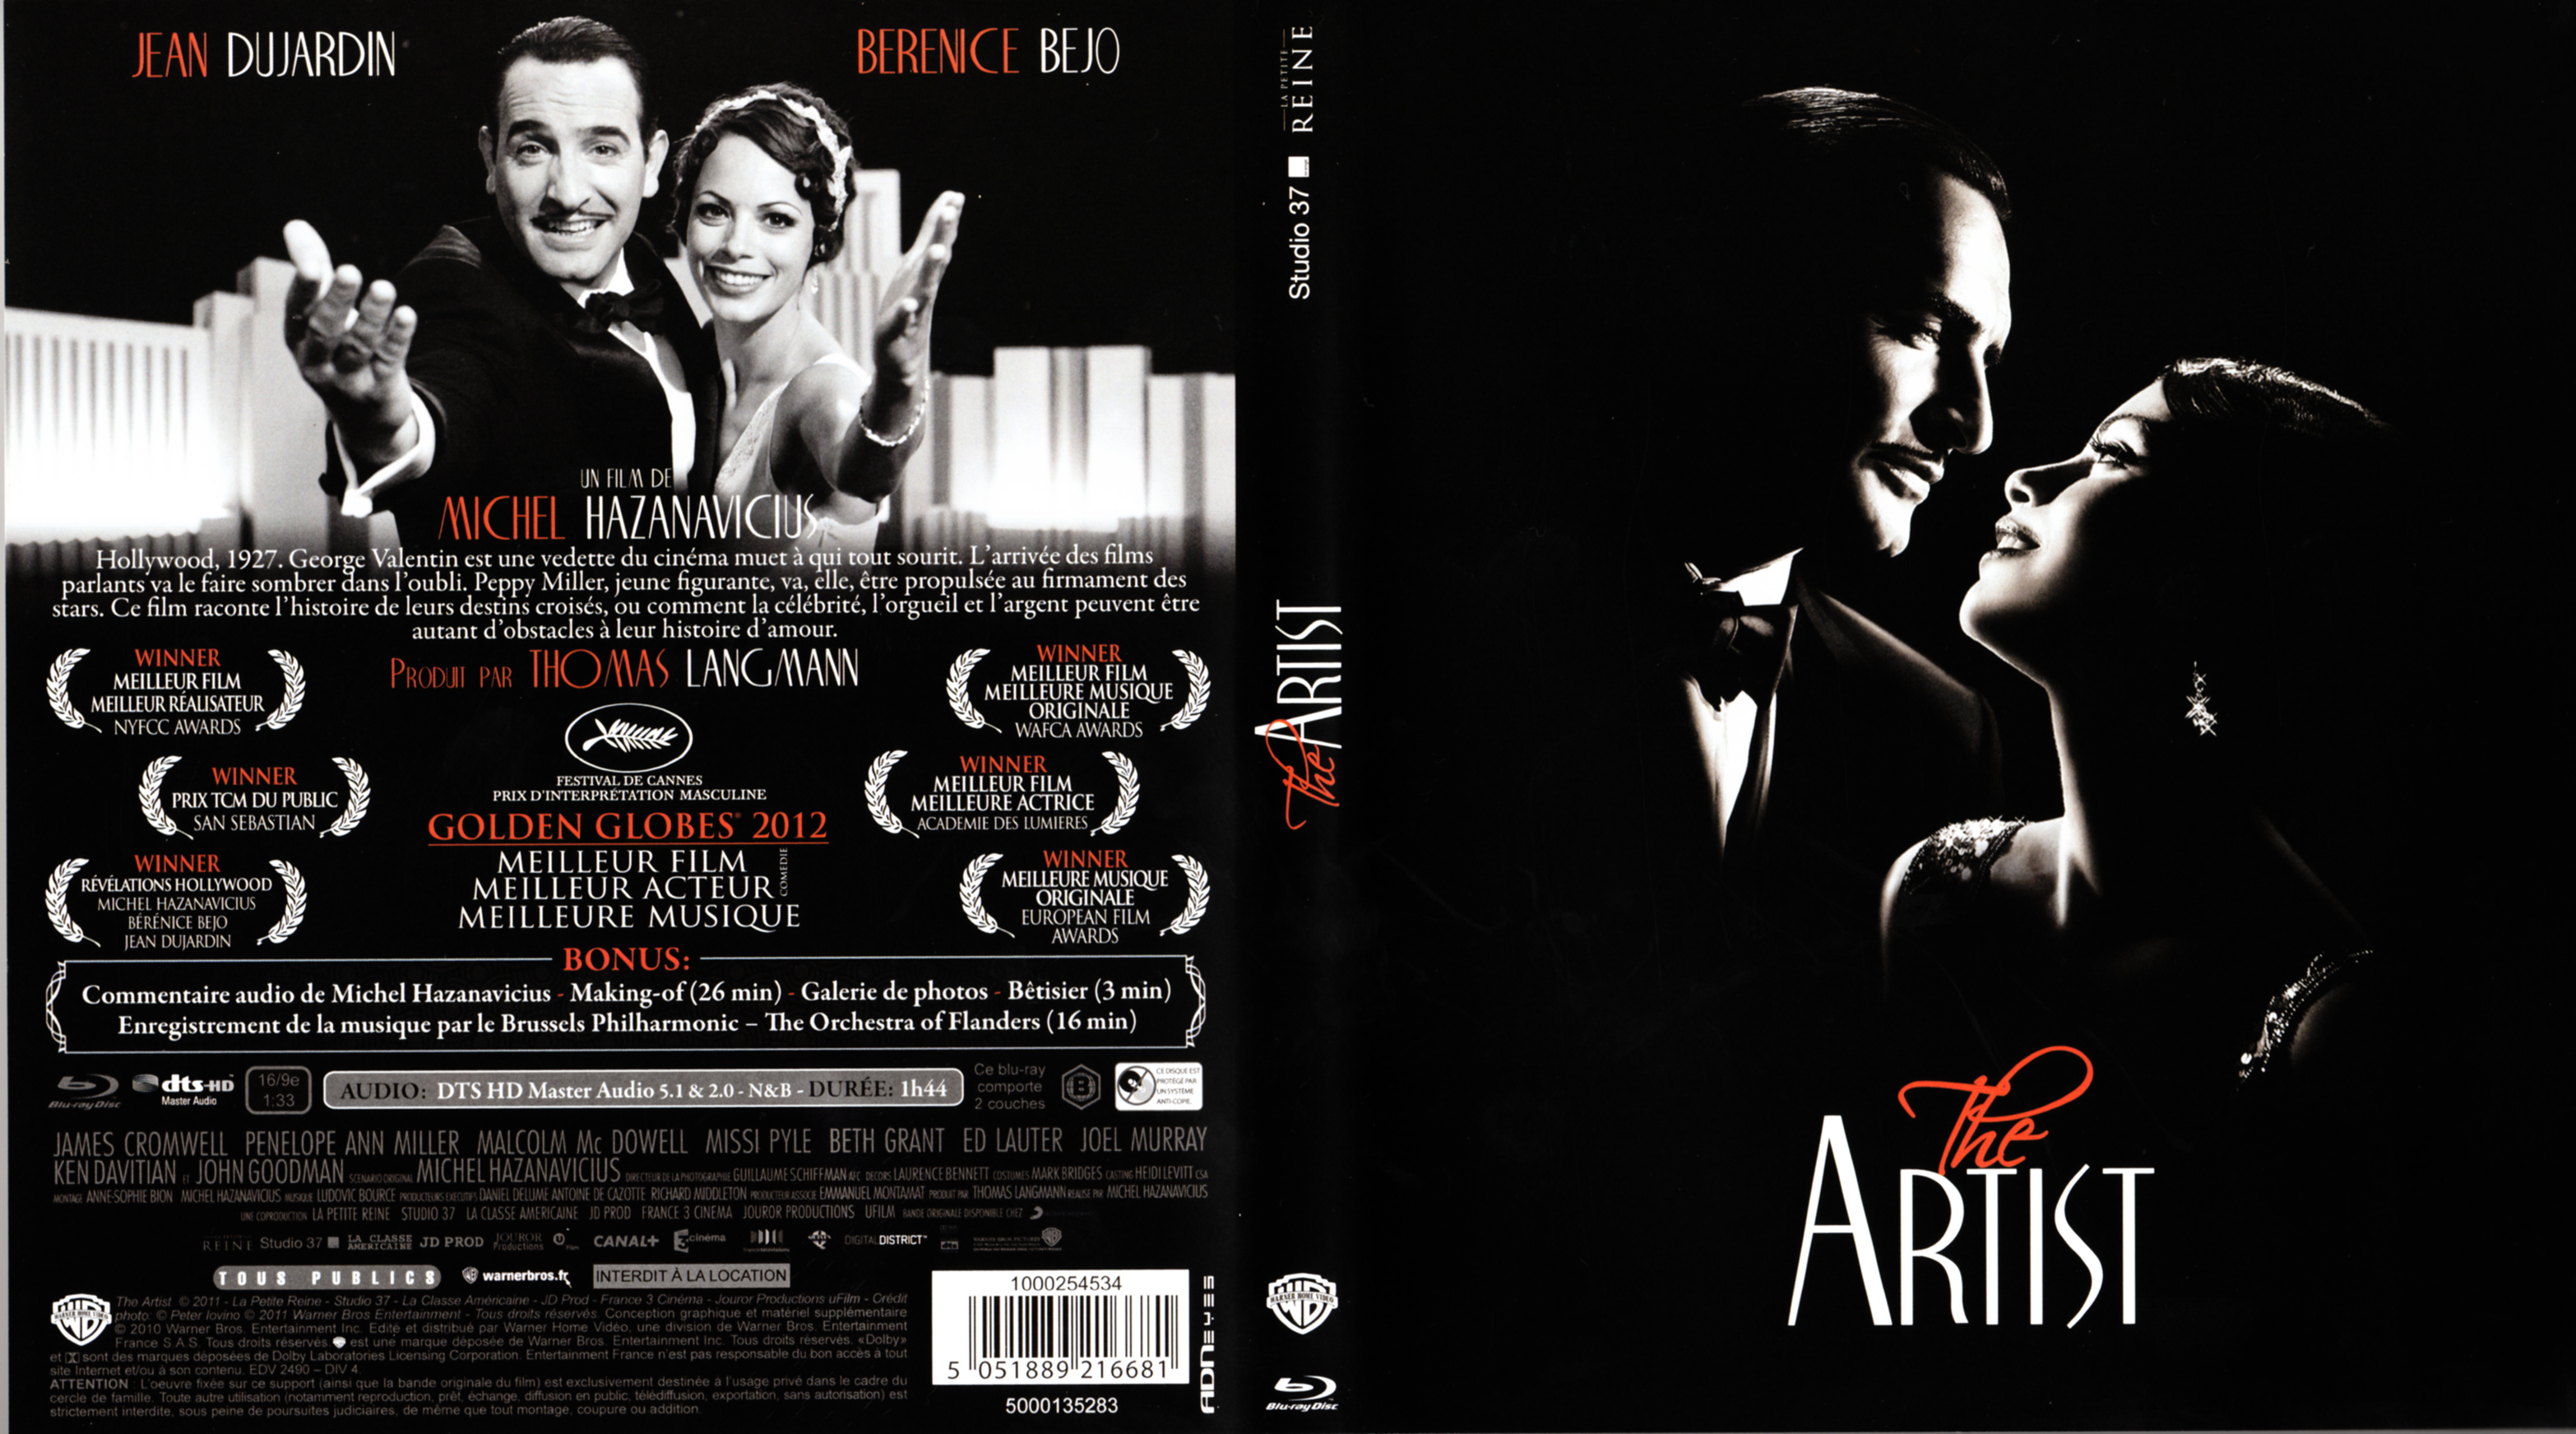 Jaquette DVD The Artist (BLU-RAY)